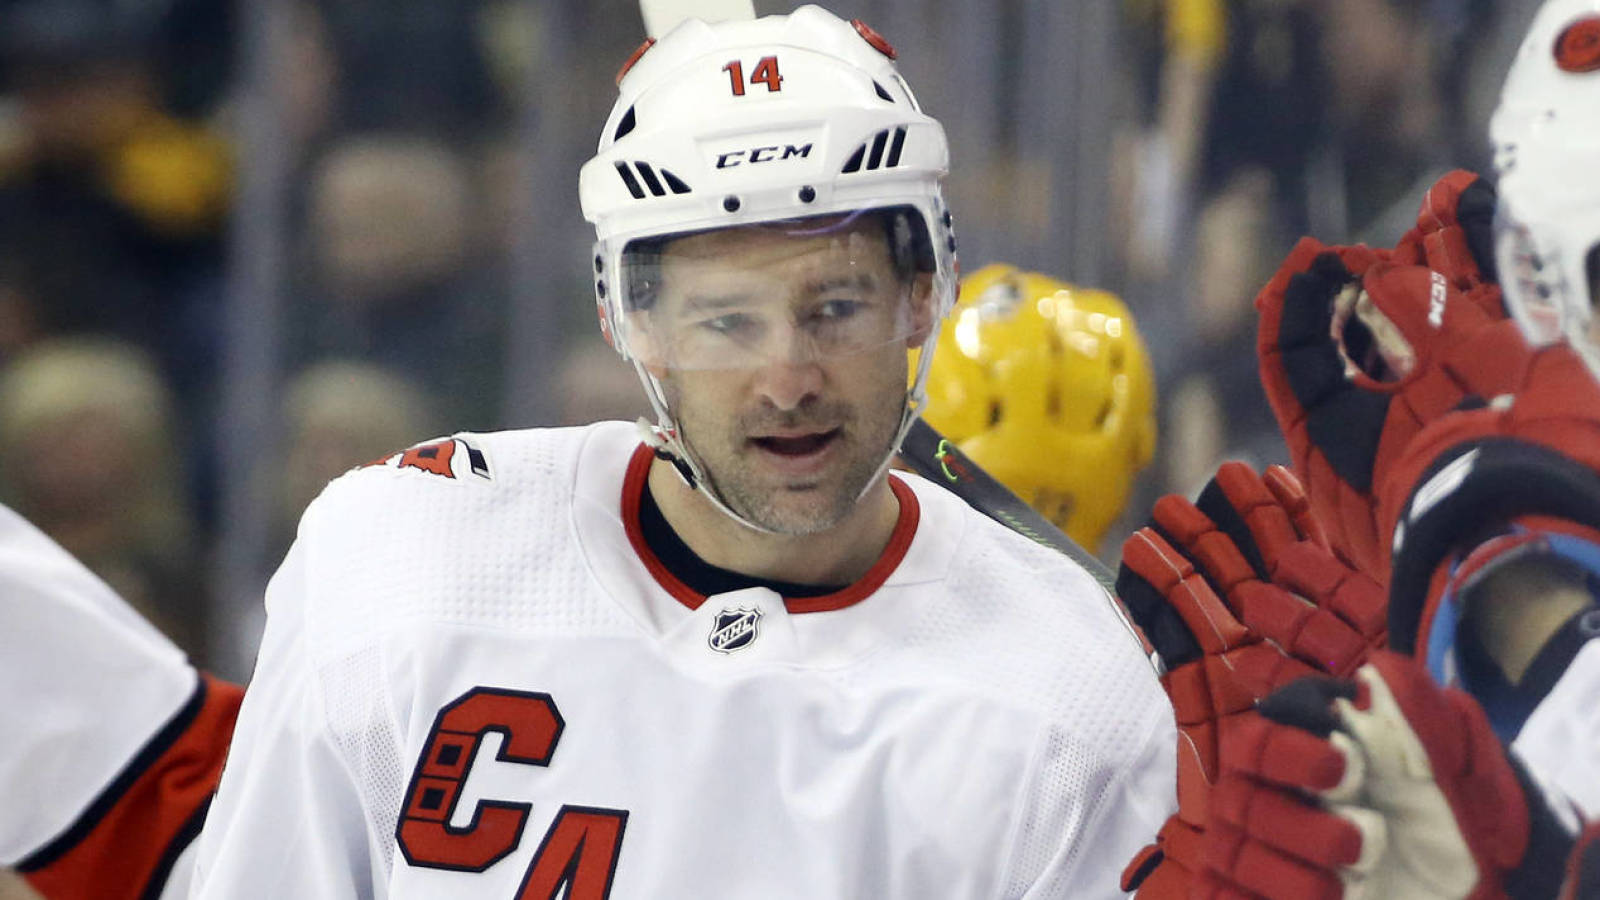 Justin Williams is taking a break from the NHL